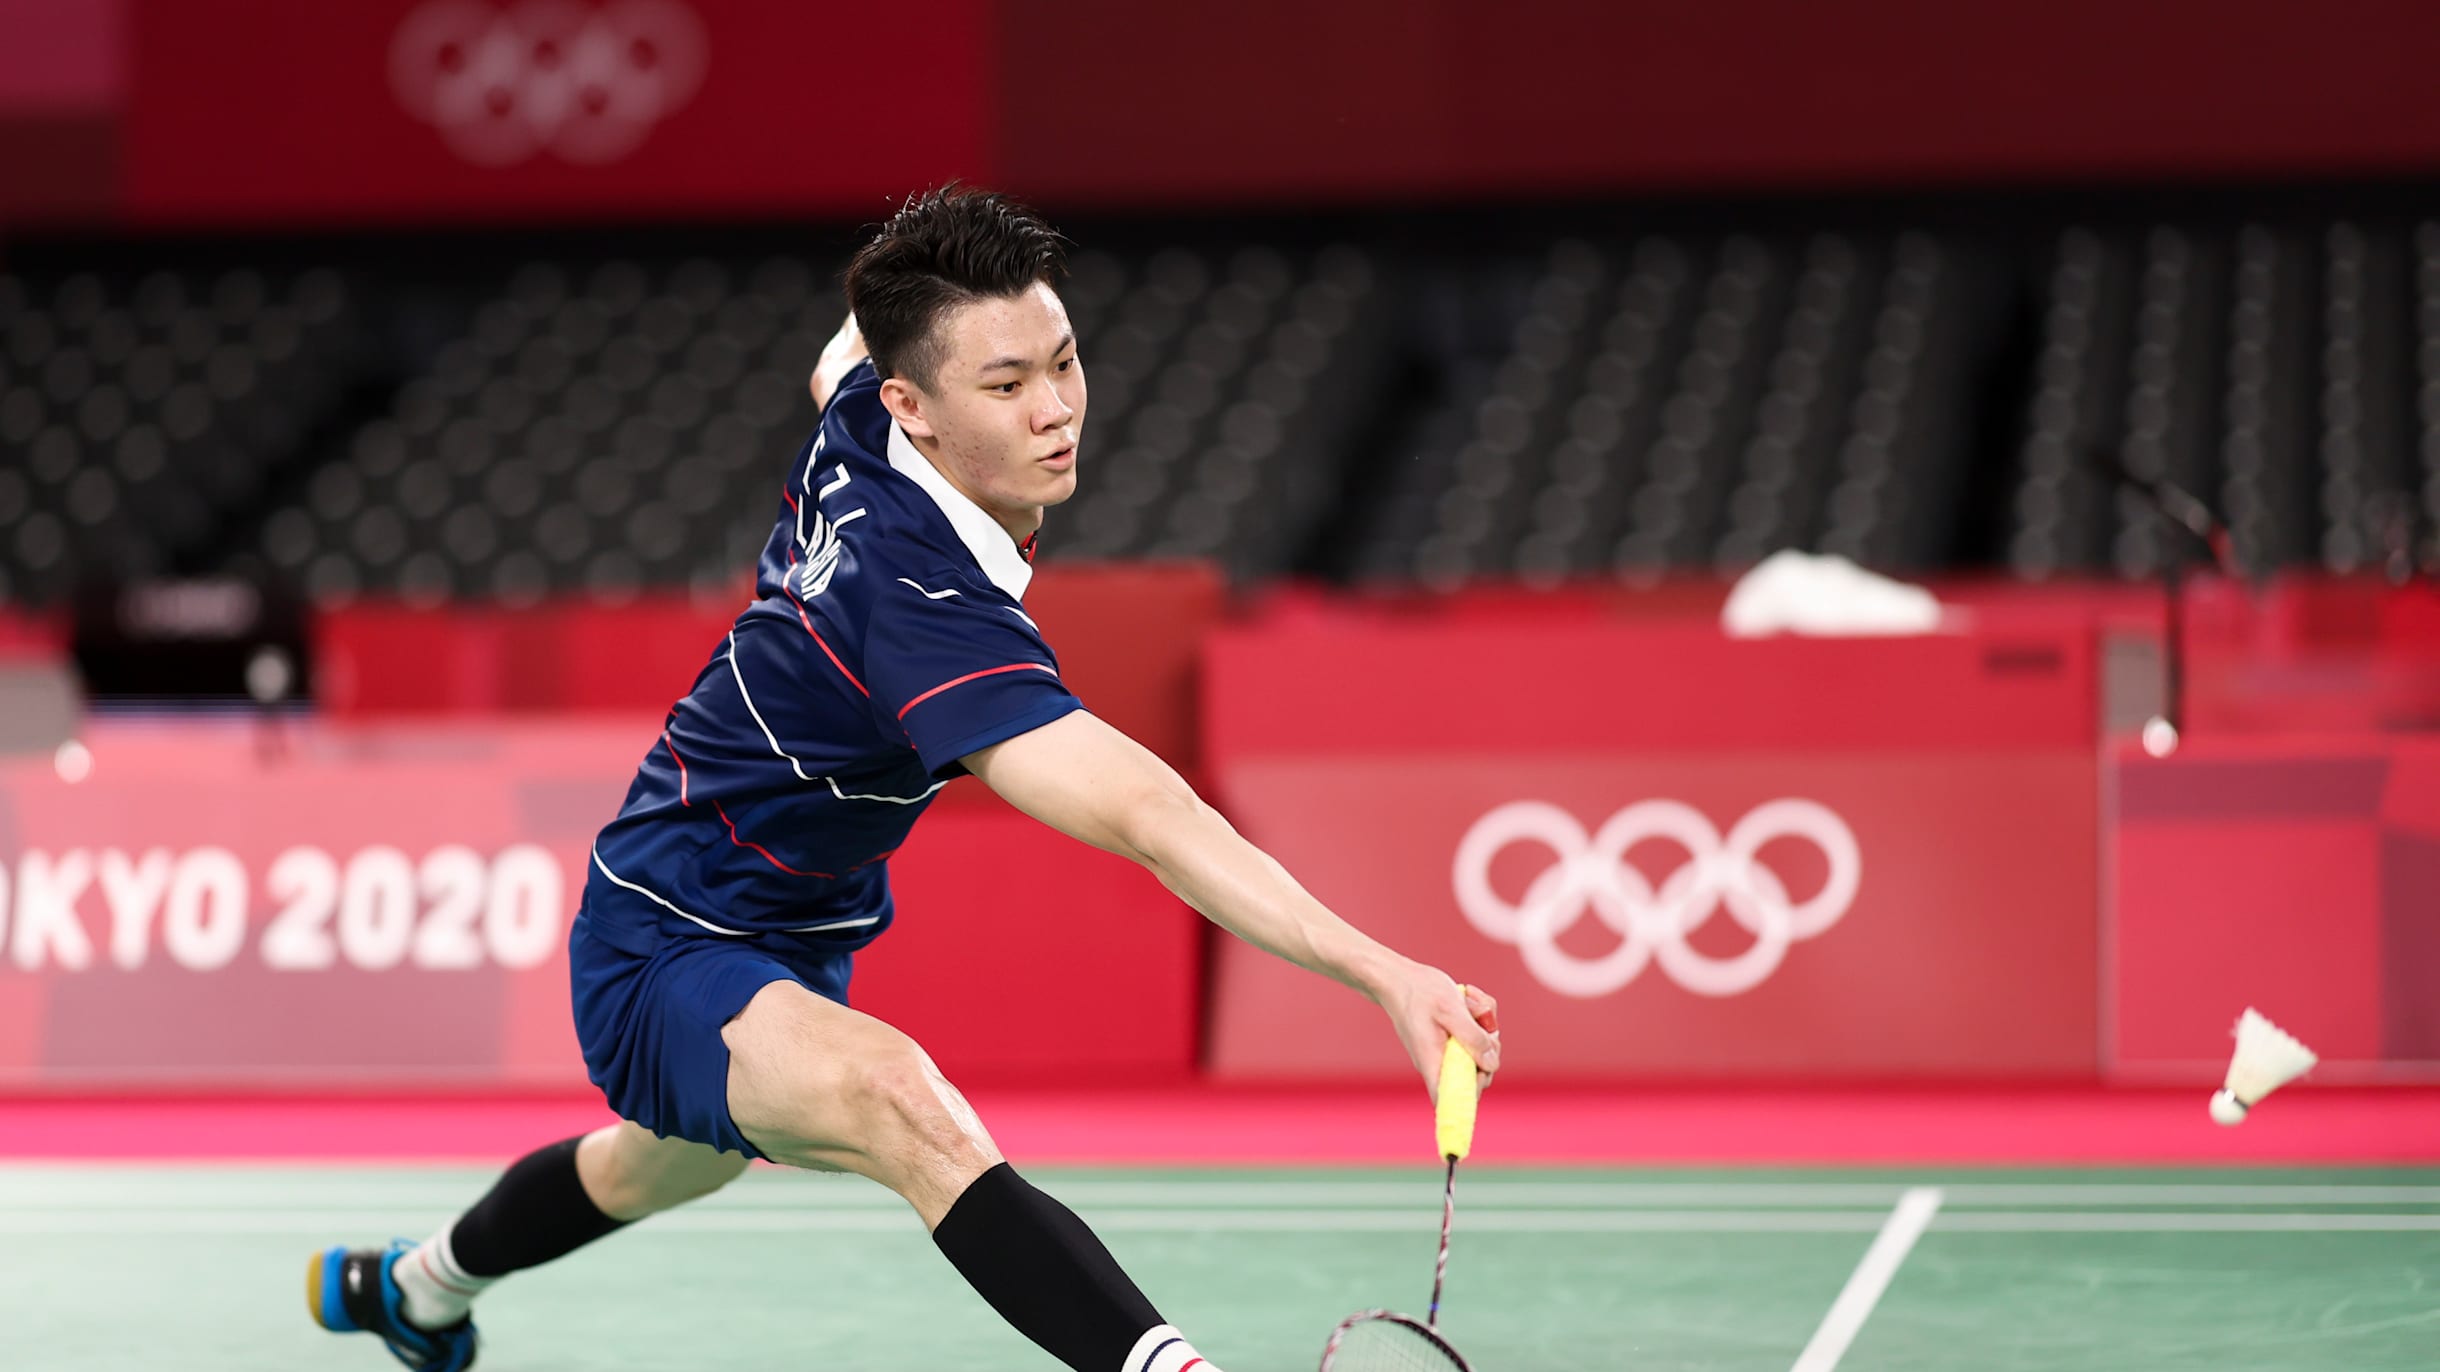 German Open 2022 Lee Zii Jia through to second round after scare